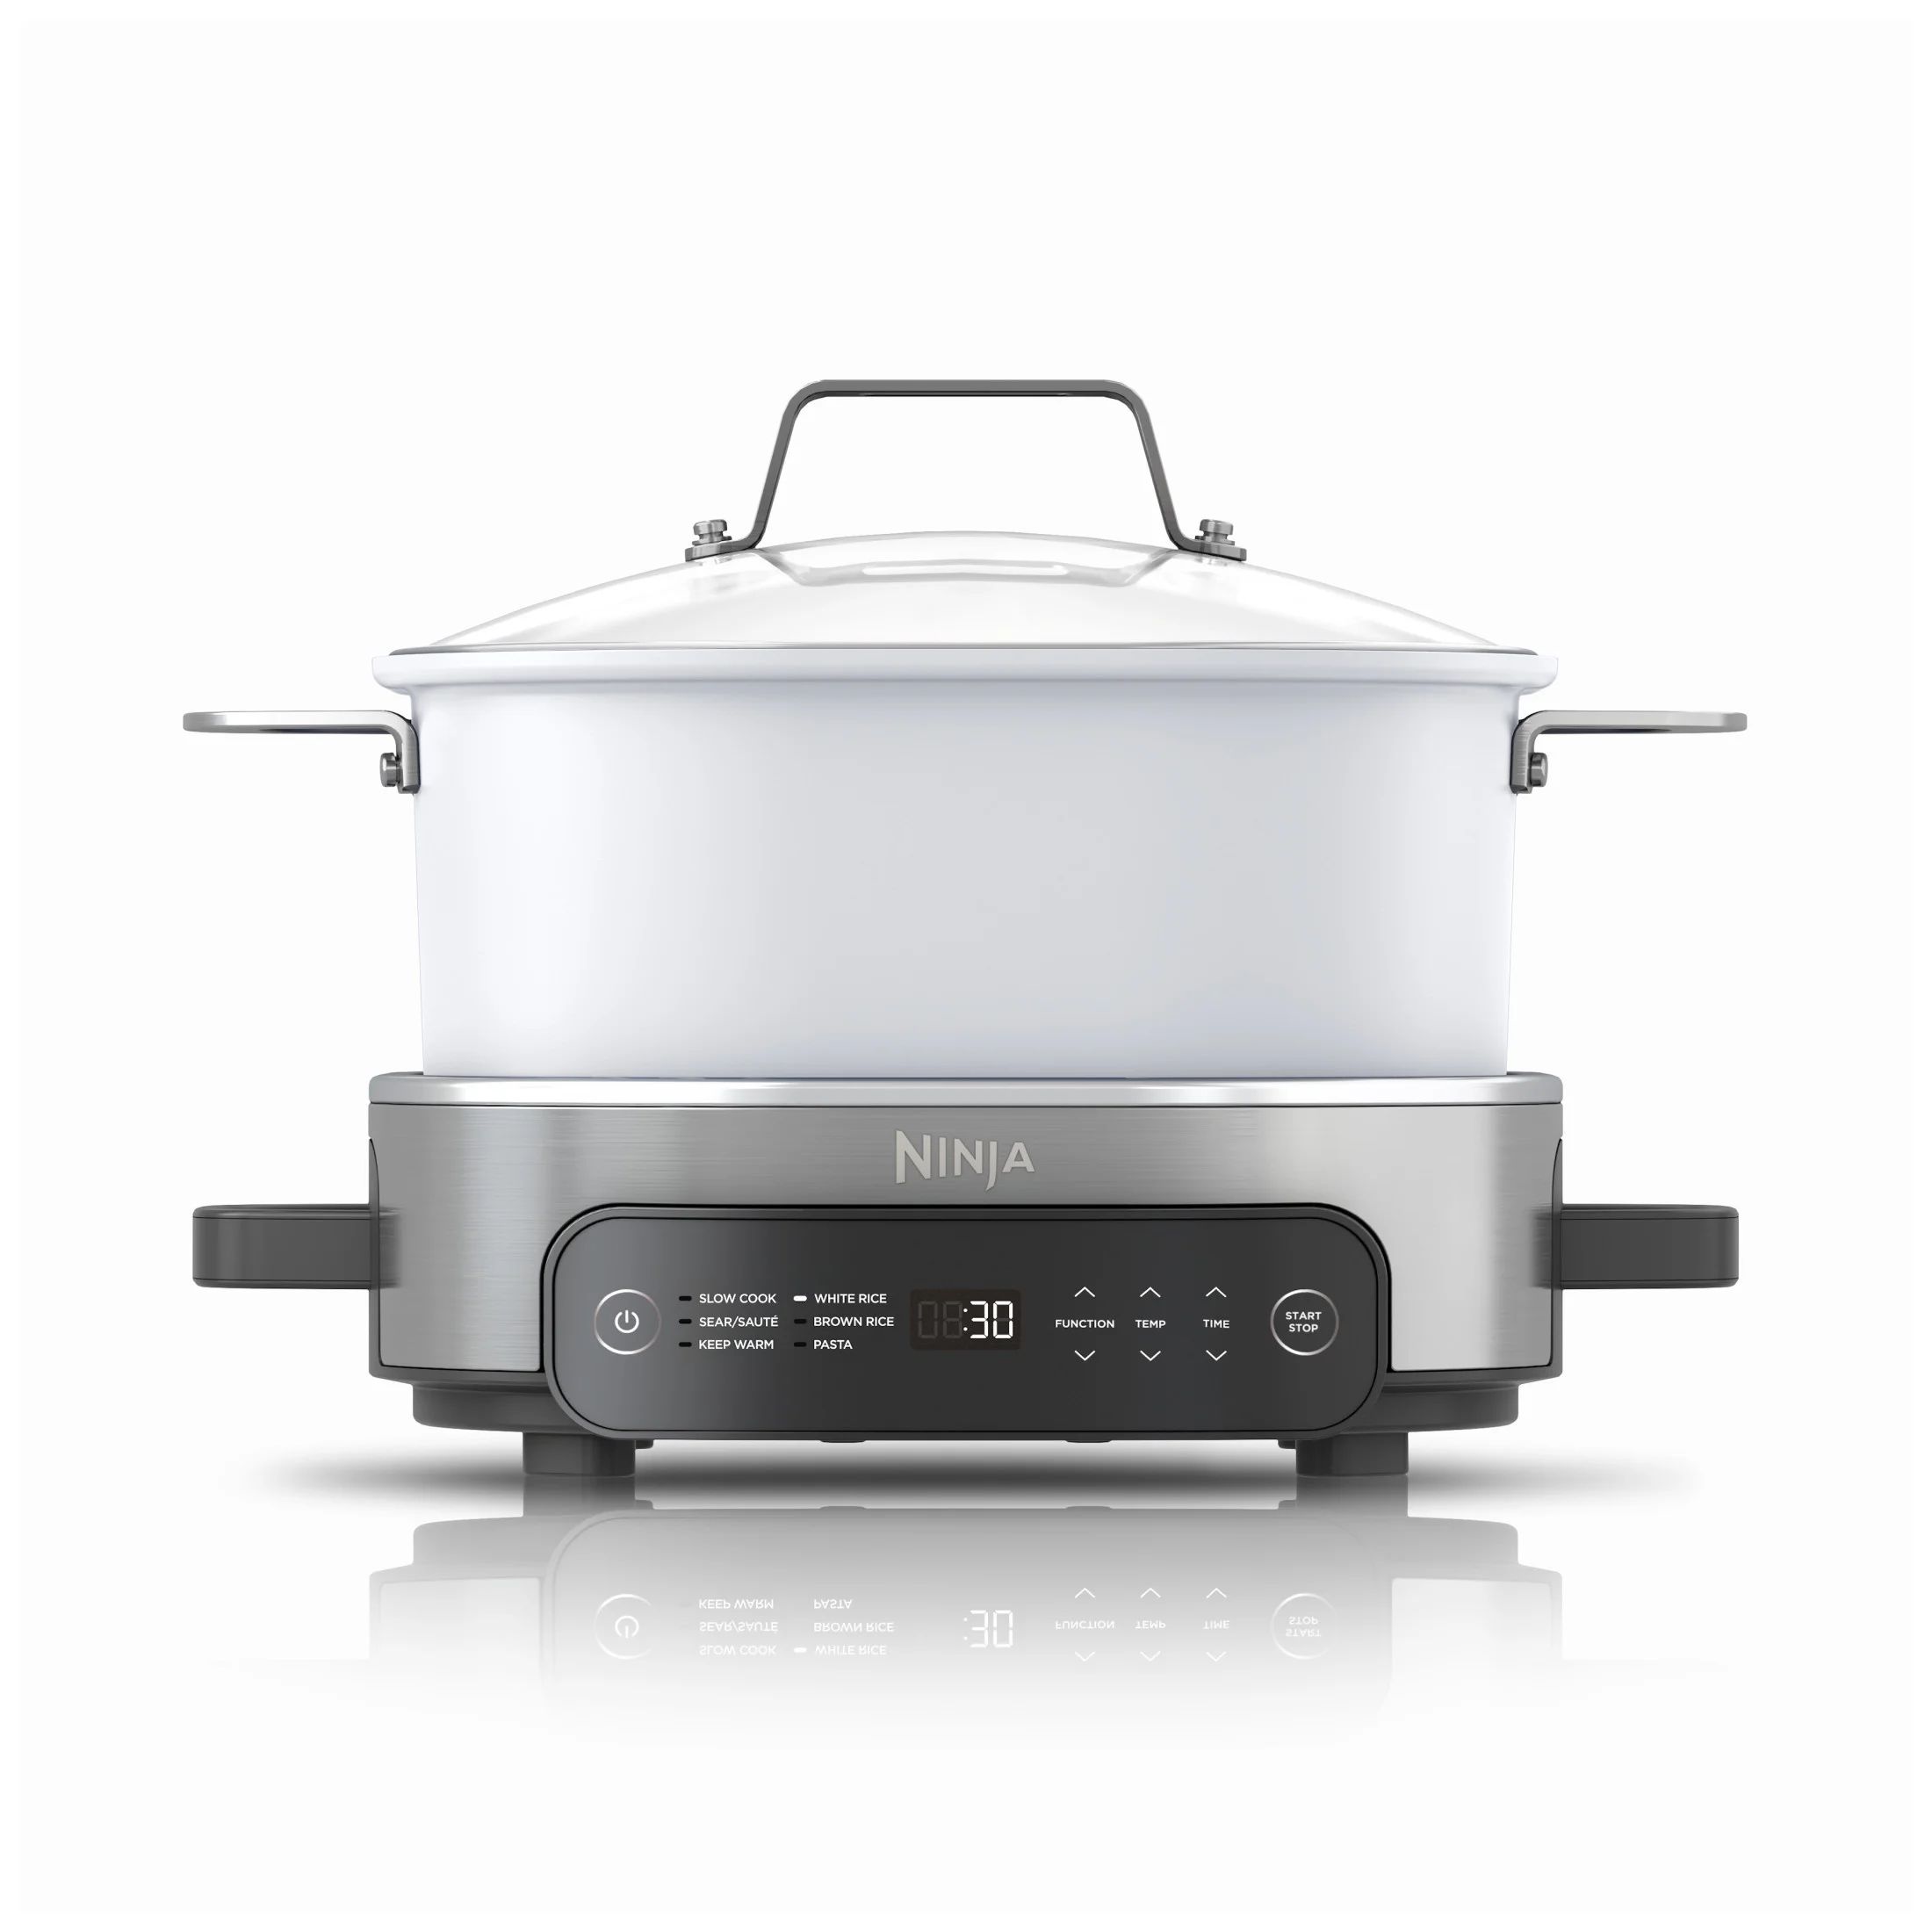 Ninja Foodi 6.5 qt Everyday Possible Cooker, Stainless Steel/White, Multi Cooker, Slow Cooker | Walmart (US)